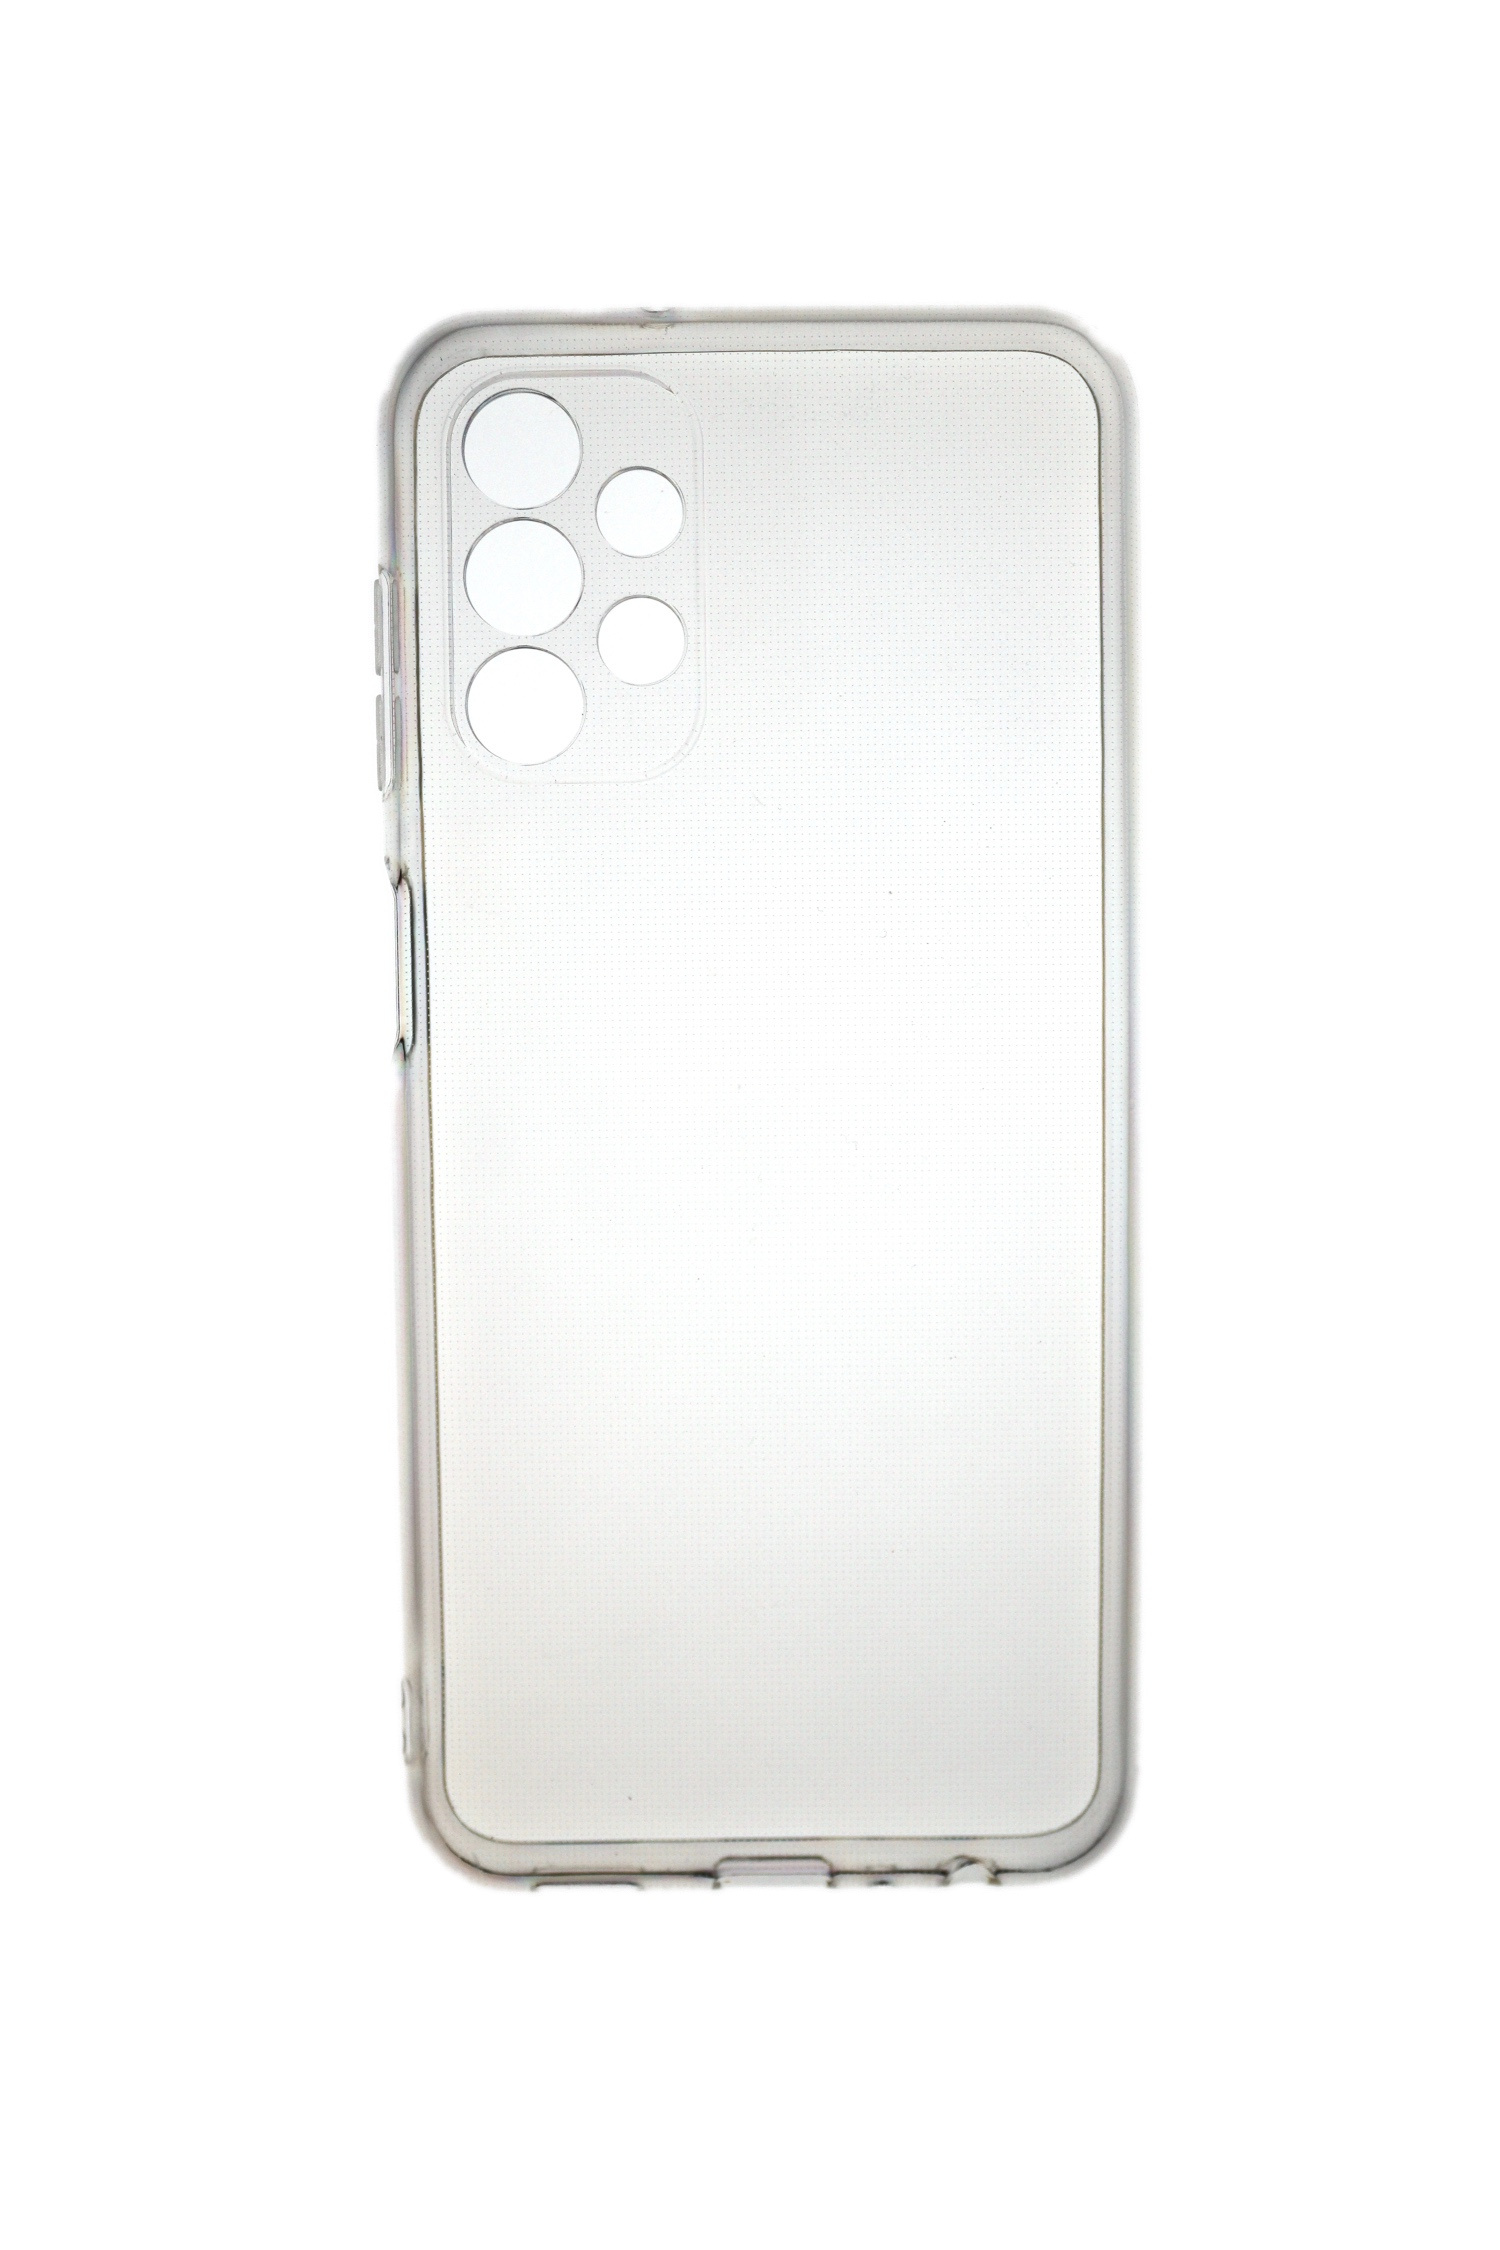 JAMCOVER 2.0 mm Strong, 5G, Backcover, A23 TPU Samsung, Case Transparent Galaxy